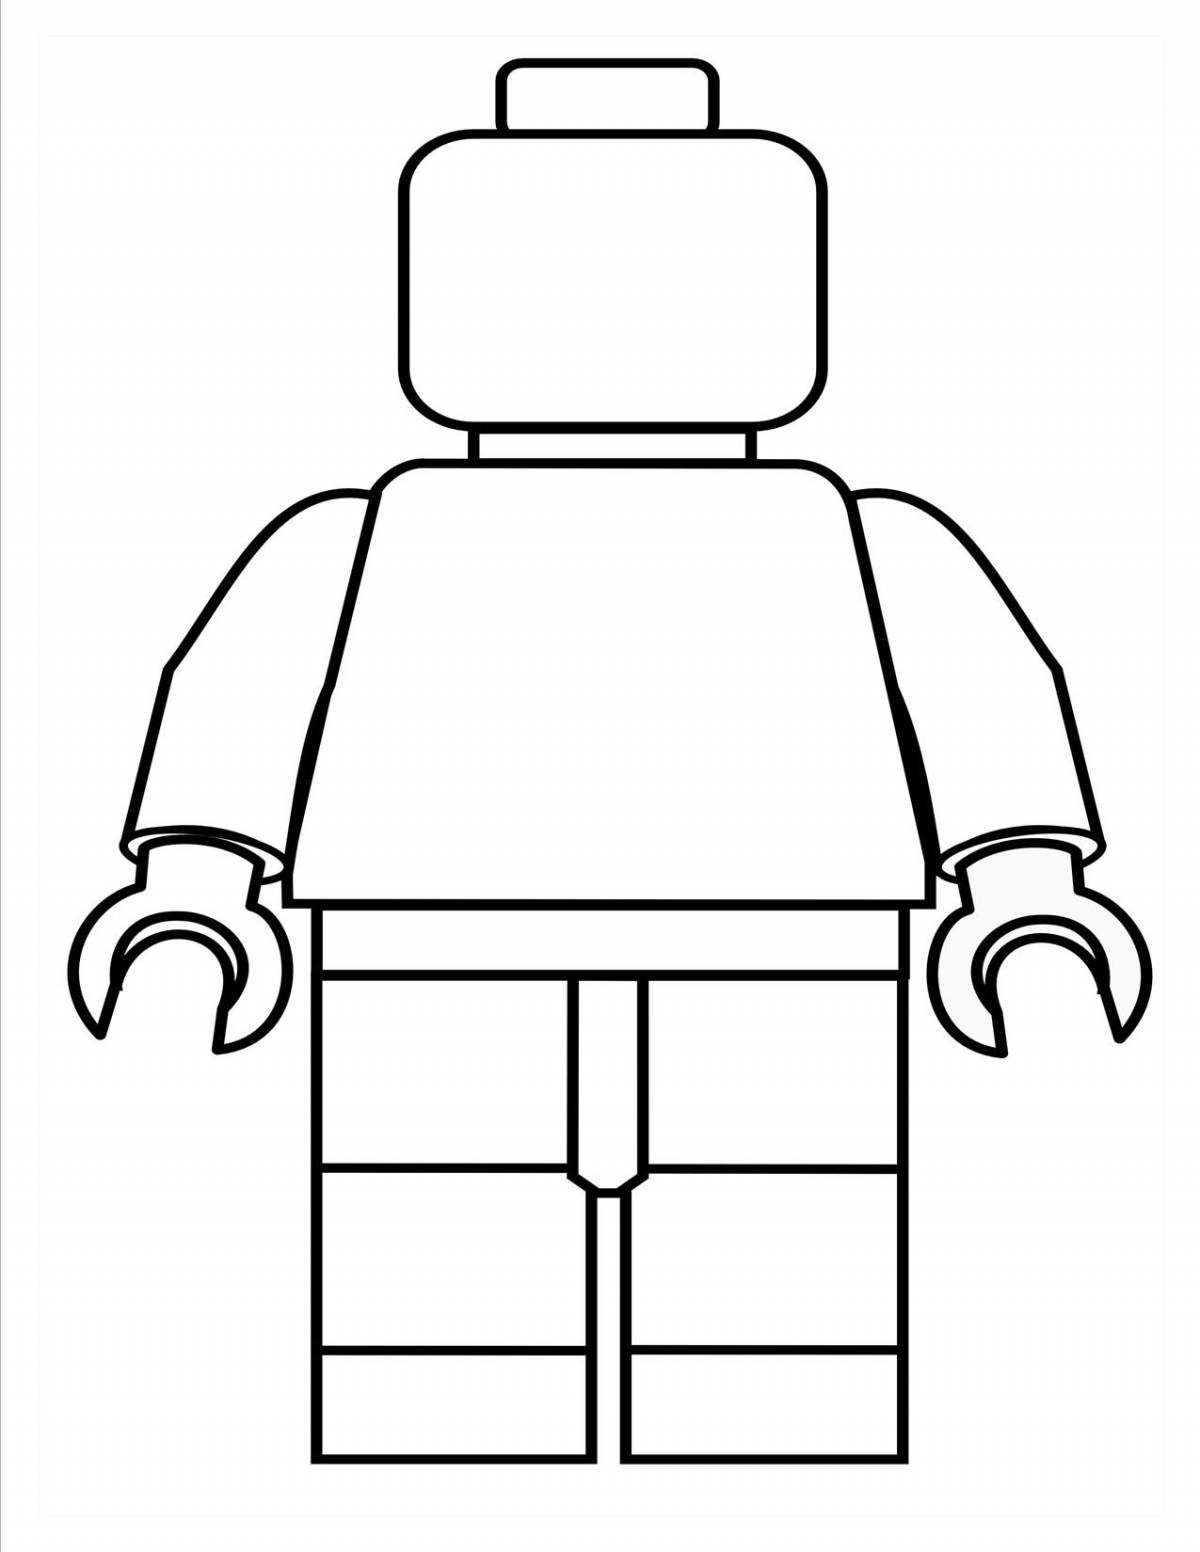 Coloring lego men with imagination